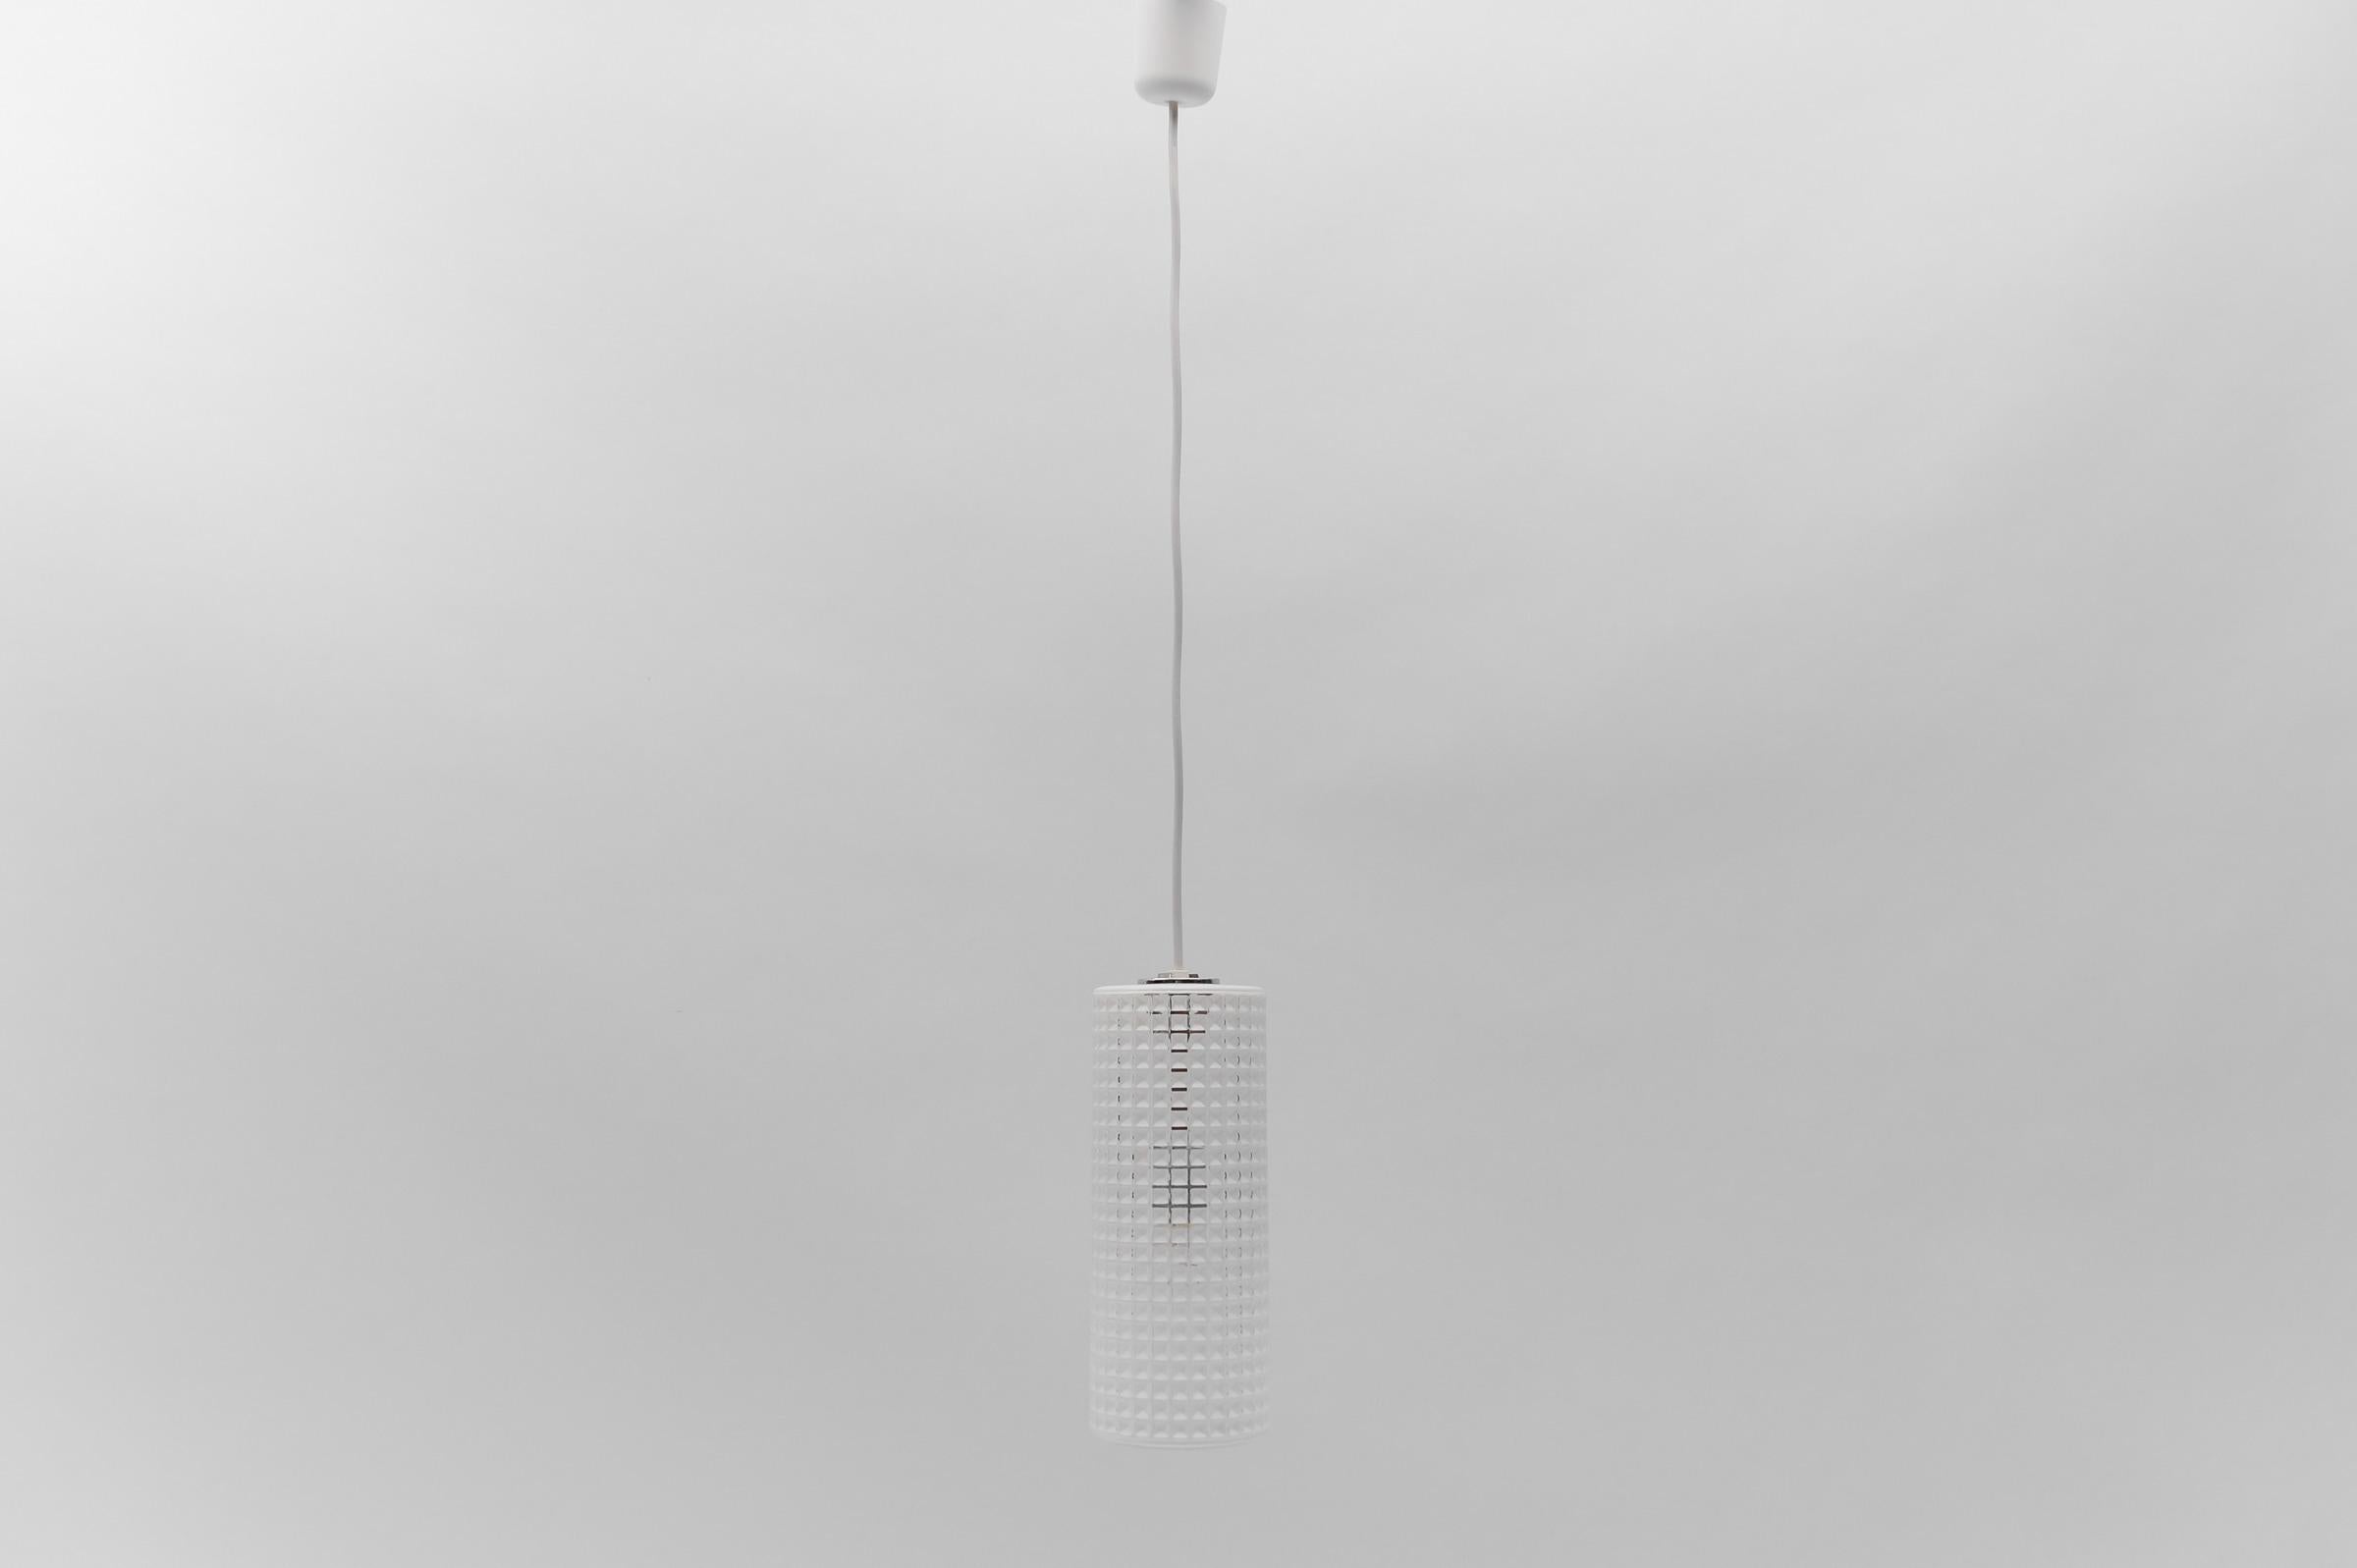 Vintage German pendant lamp in glass by Limburg. E27 socket. 

Height changeable by the cable. Maximum height is 100 cm, minimum 50 cm. Diameter 12 cm. From the 1960s.

The lamp is executed with an E27 Edison screw fit bulb. It is wired and in